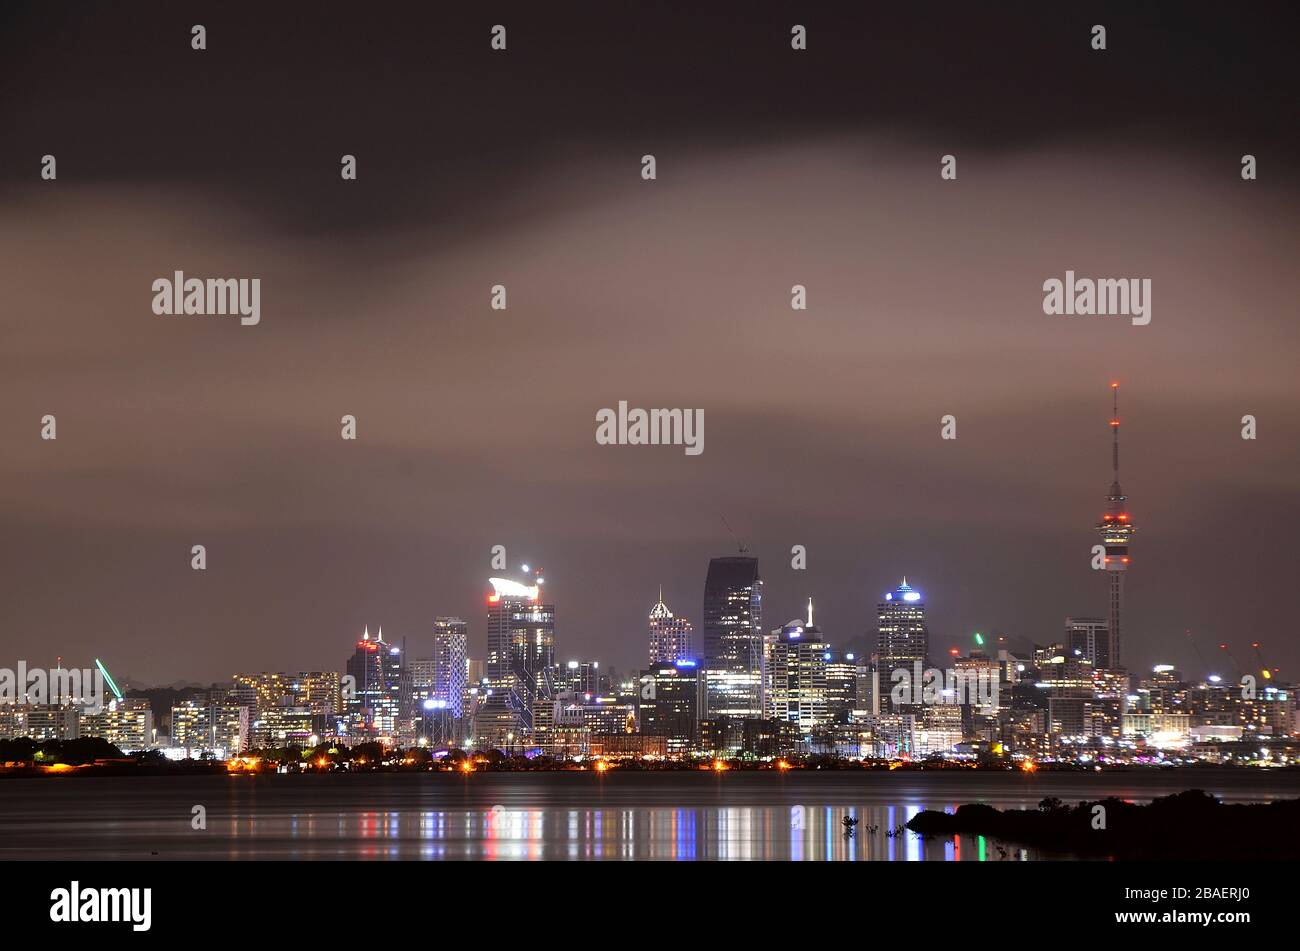 Skyline of Auckland at night seen from the bay Stock Photo